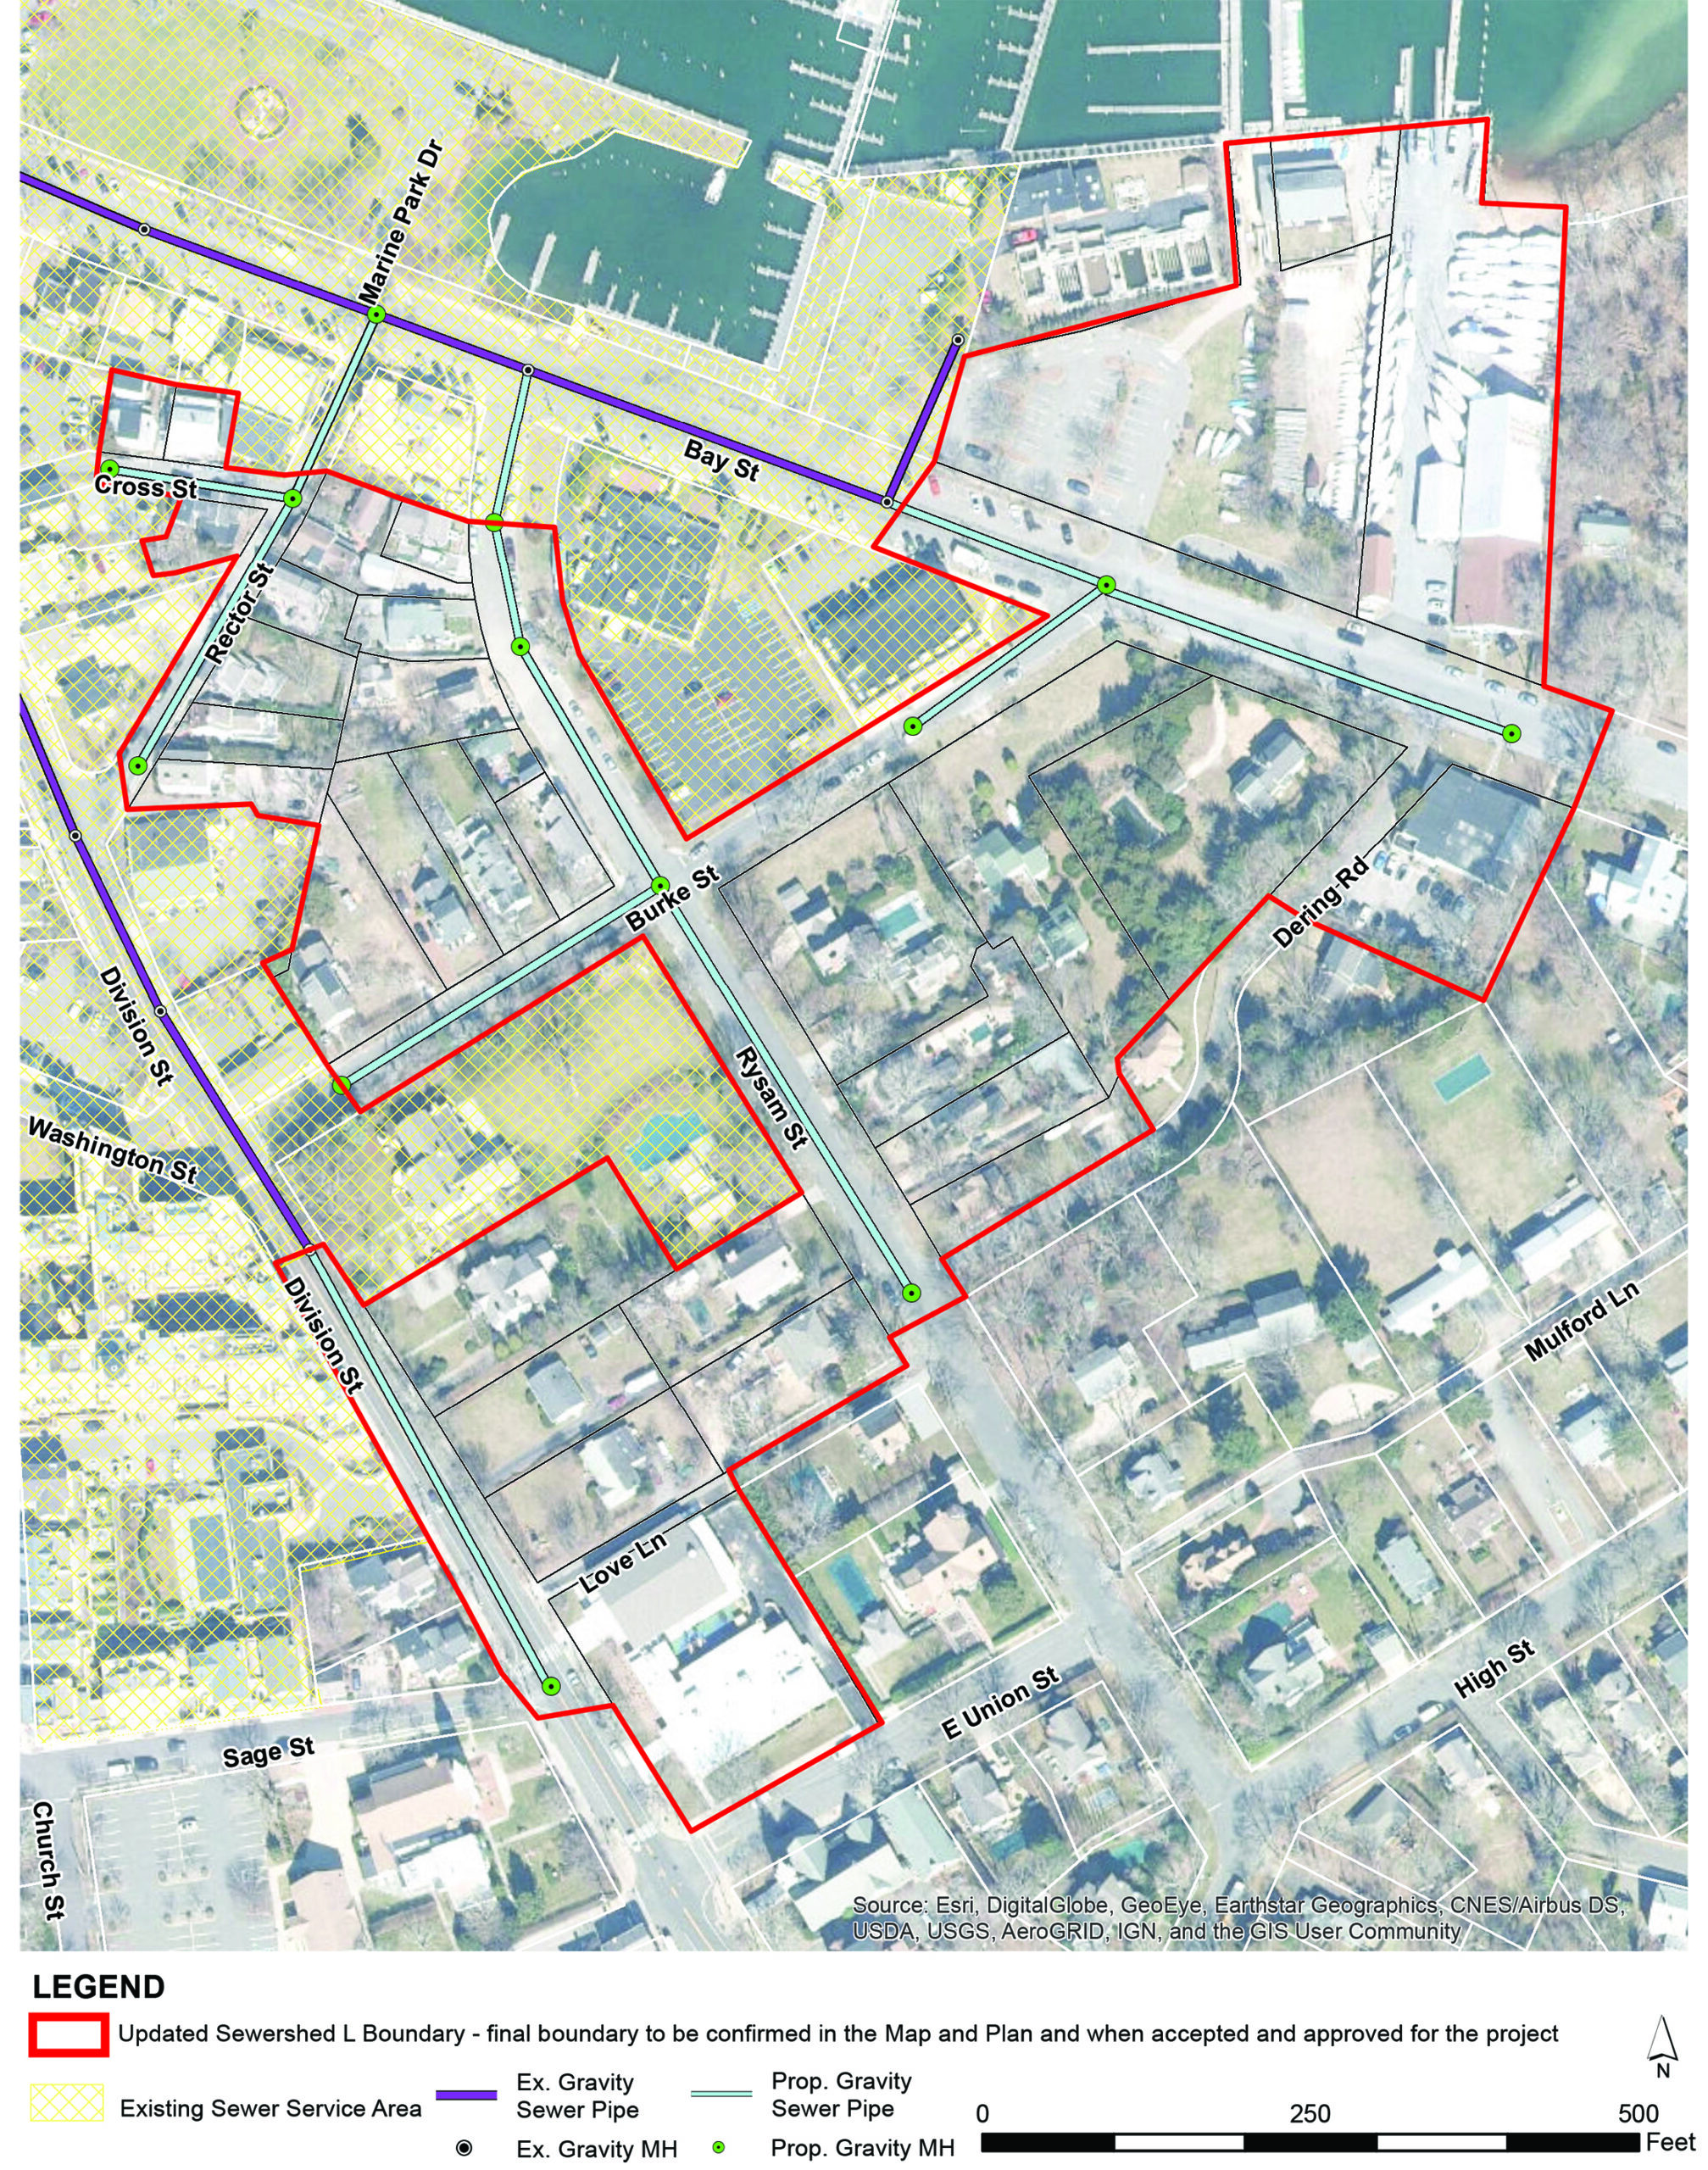 Sag Harbor Village plans to extend its sewer system into a neighborhood between Rysam and Division streets where homes currently have cesspools that leach nitrogen into groundwater and the nearby harbor.